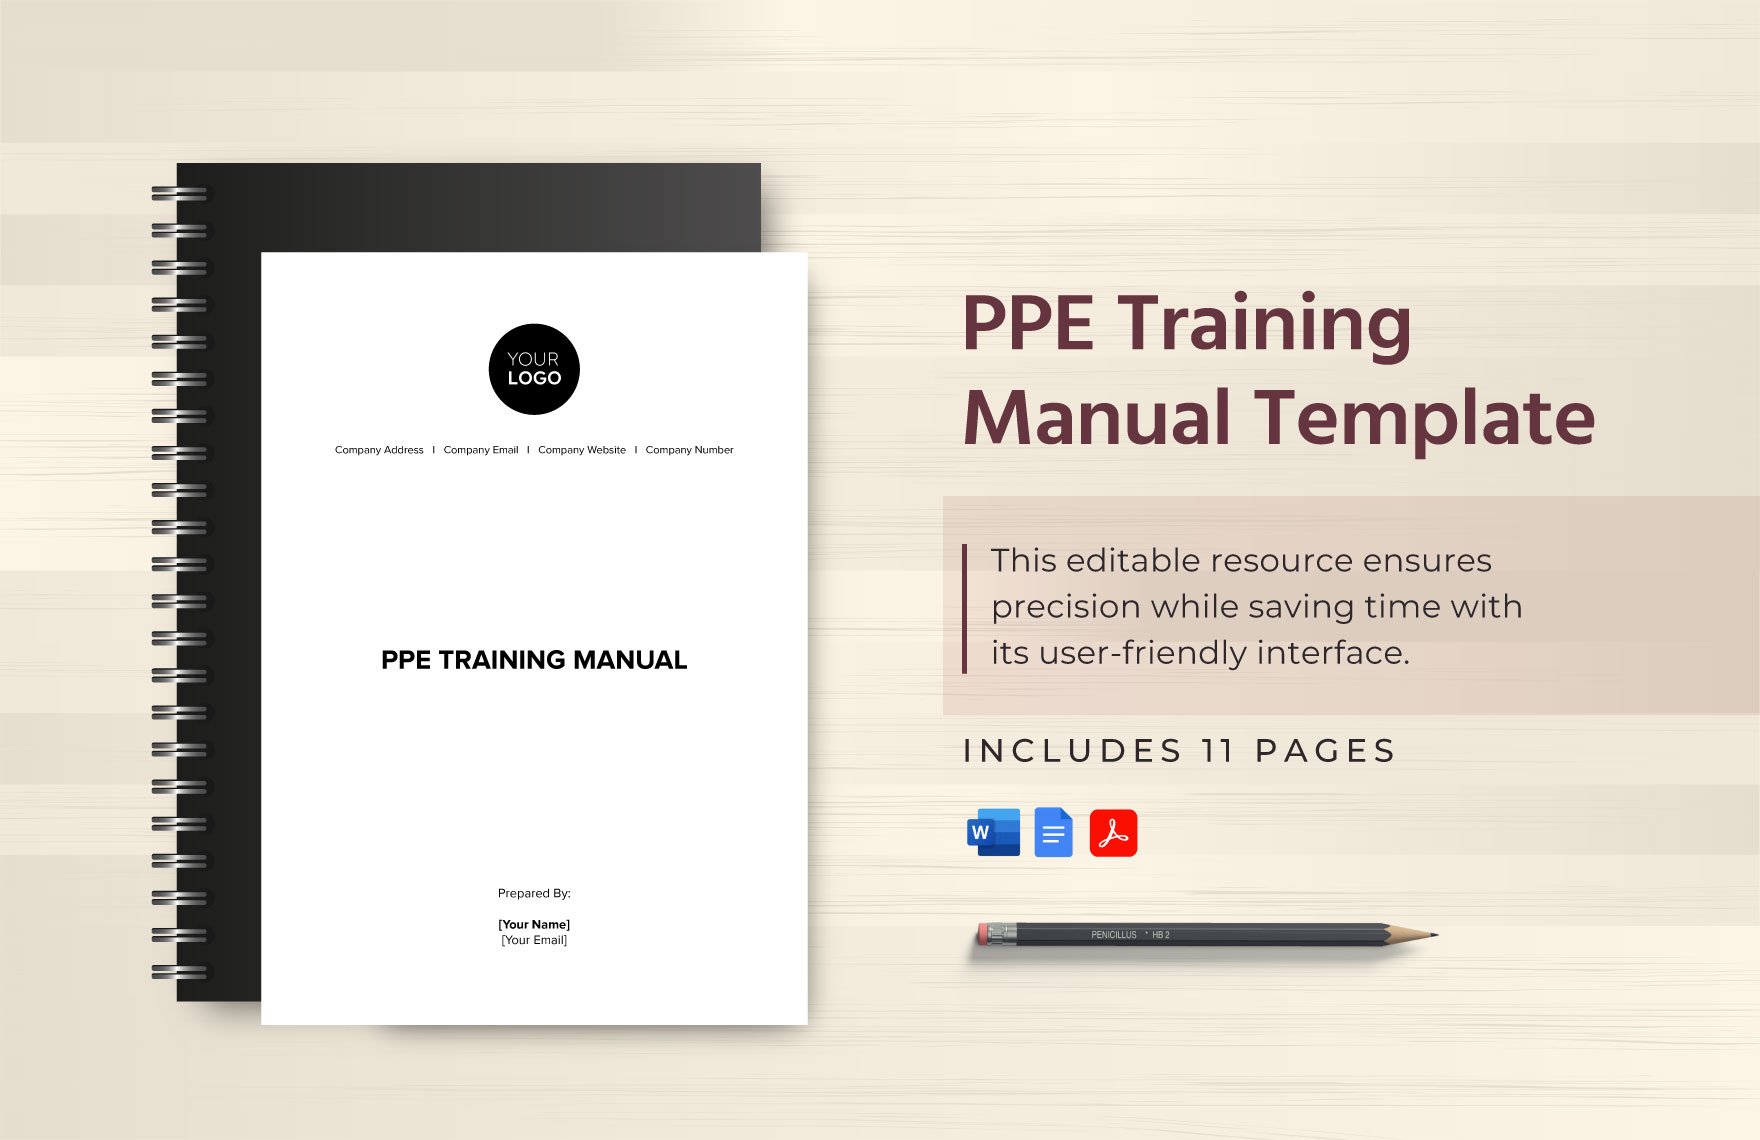 PPE Training Manual Template